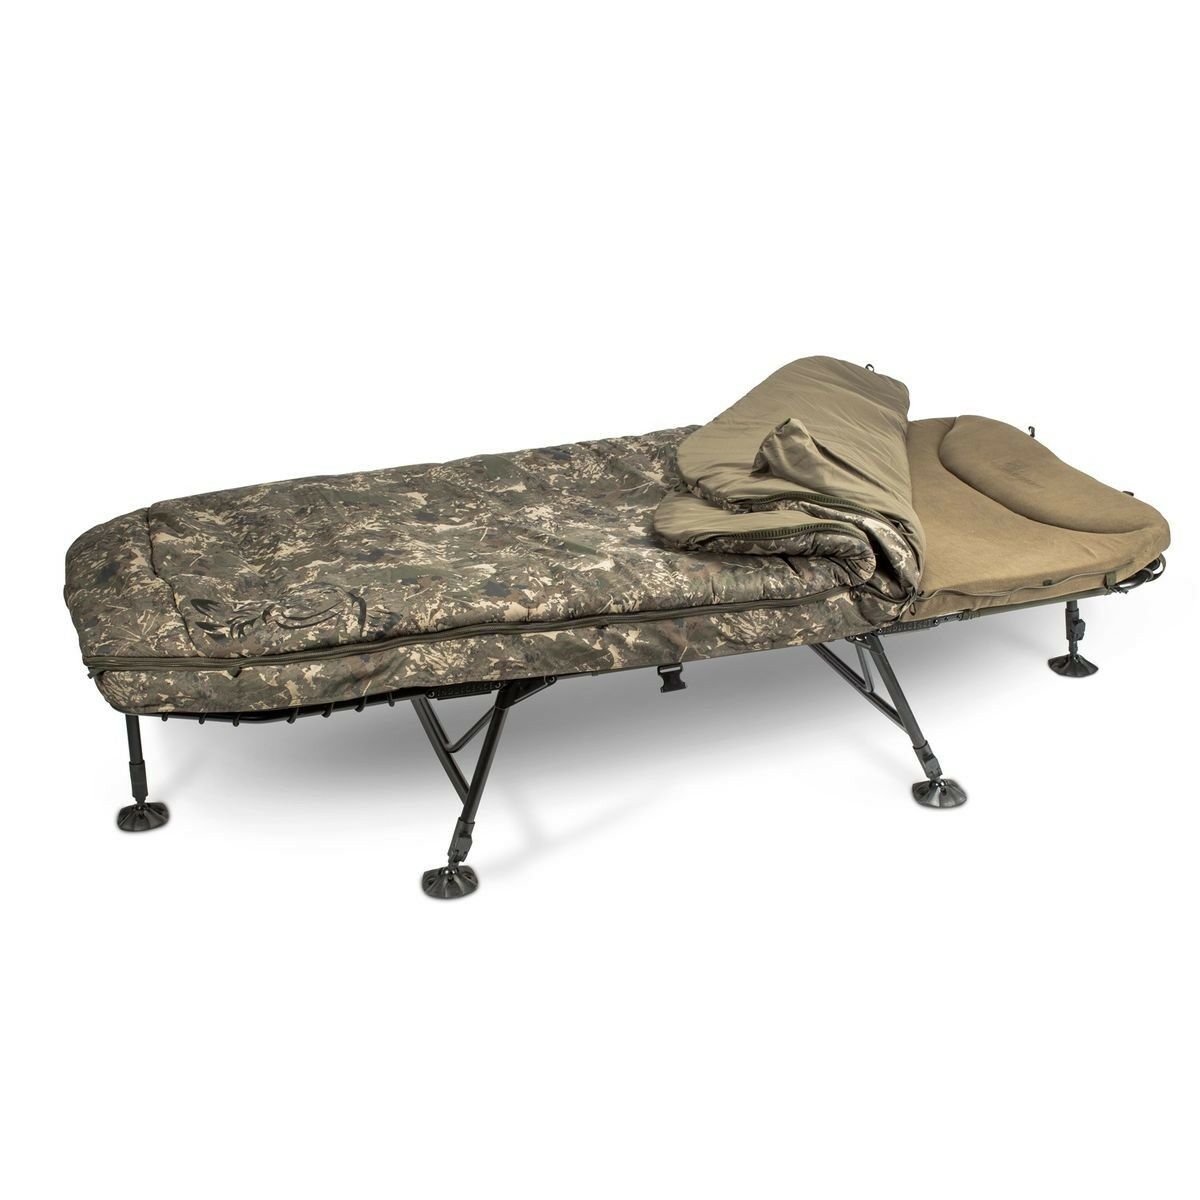 The Best Carp Fishing Bedchairs And Sleep Systems A Total Fishing Tackle Review